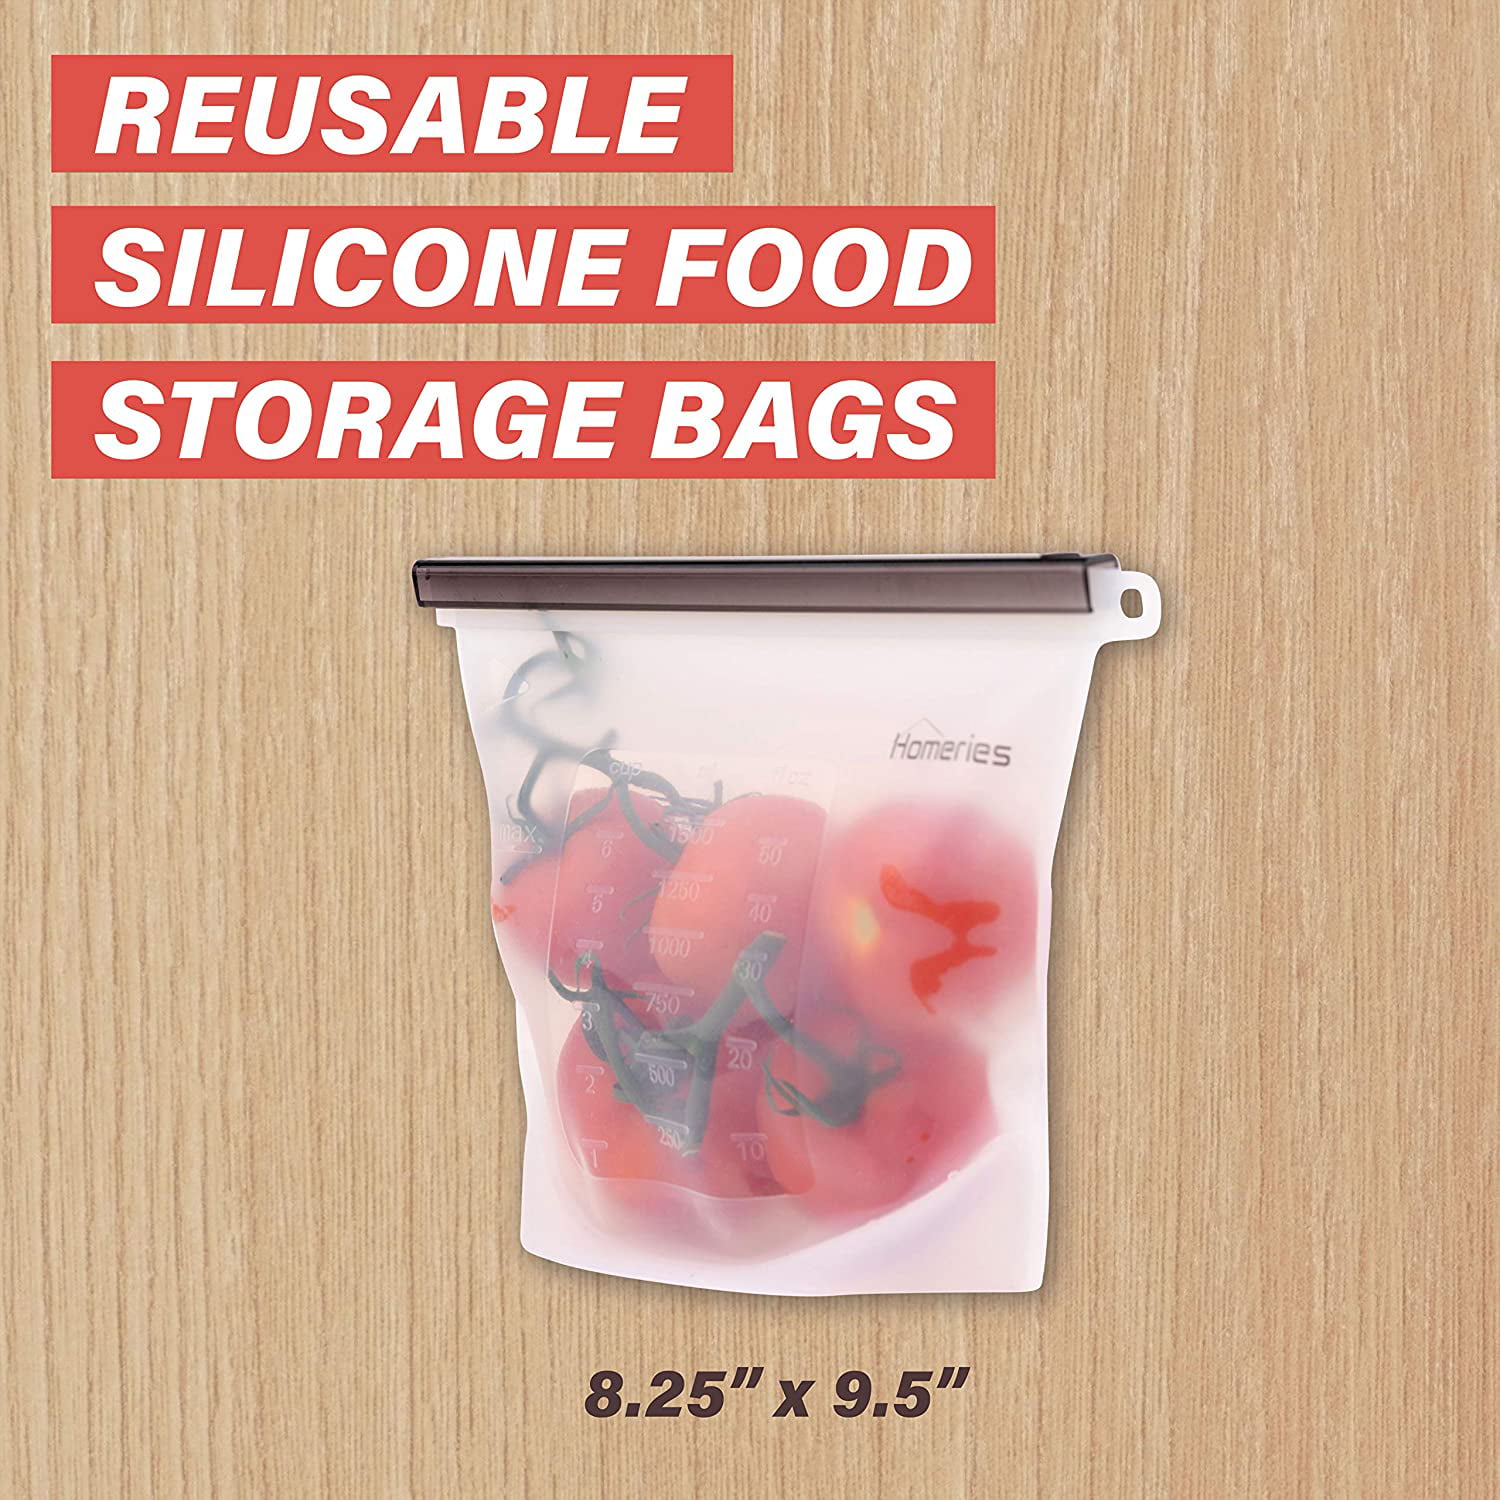  Reusable Silicone Food Storage Bags 3 Pack - 2 Large Food Bags  50OZ & 1 Quart Silicone Bag - Reusable Freezer Bags Leakproof - Reusable  Sandwich Bags Dishwasher Safe - Silicone Sous Vide Bags Airtight